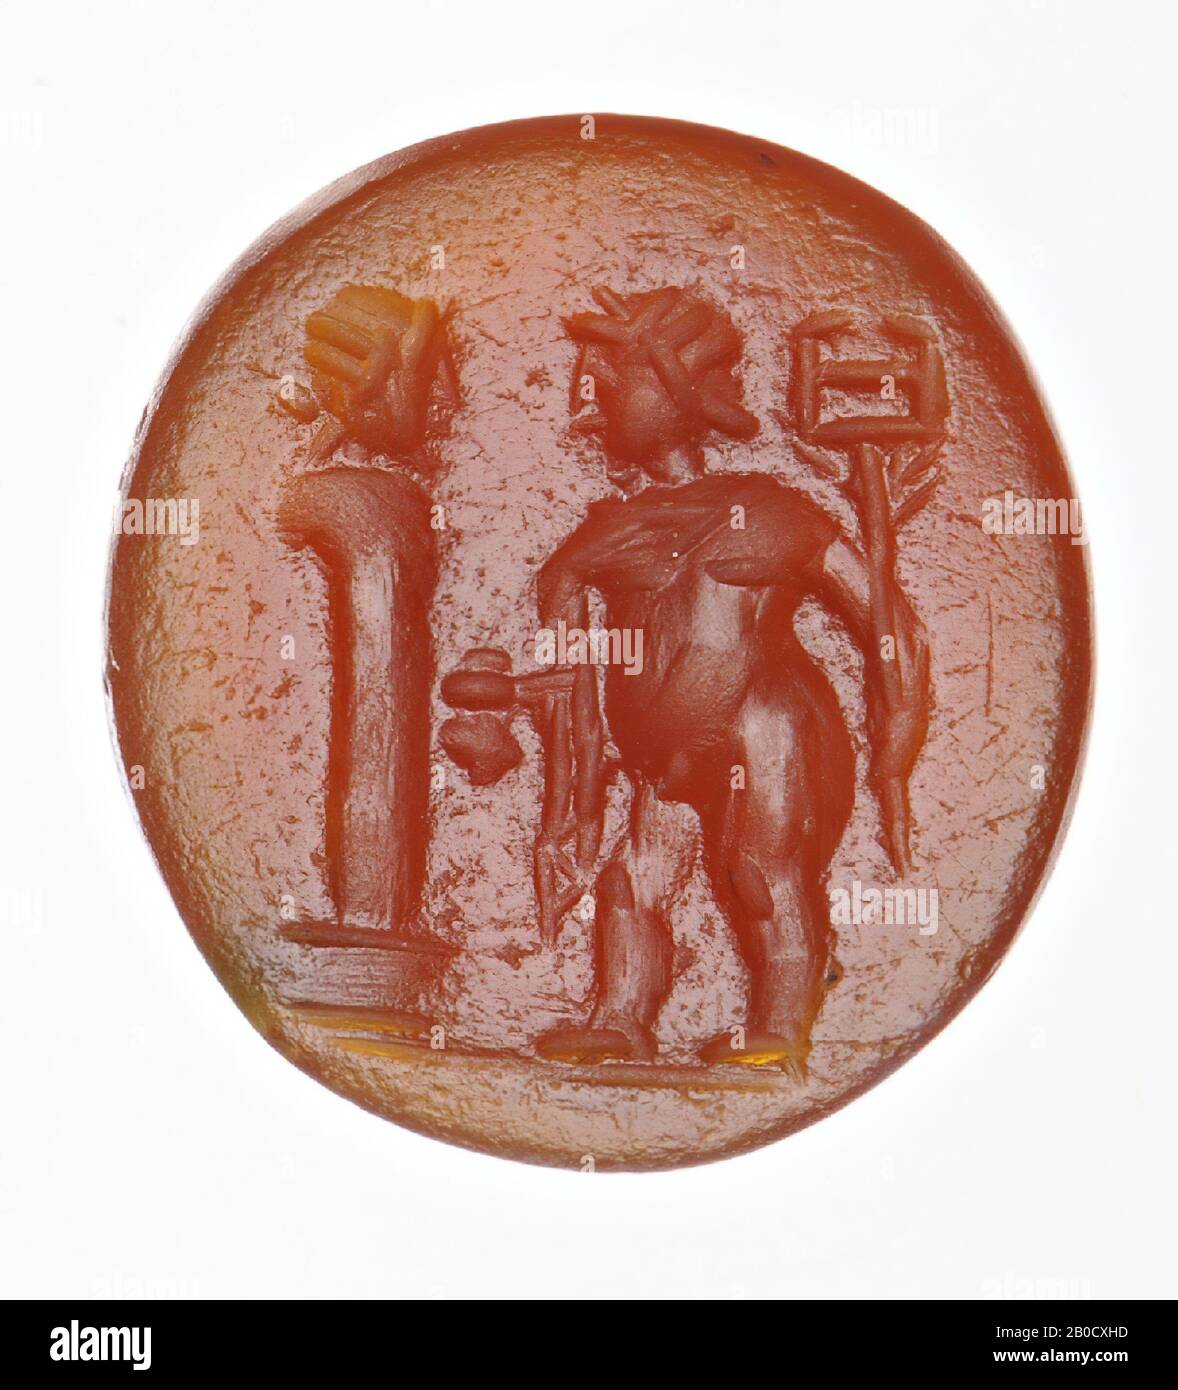 Vz: a fat boy, probably Cupid although there are no wings visible, has a caduceus in his left hand and a money bag in his right hand, he carries a chlamys over his shoulders, he looks at a herm placed on a pedestal for him., gem, intaglio, ringstone, carnelian, Color: yellowish brown, Shape: oval, Machined: edge cut at the front compared to the rear, Method: body modeling with large rounded drills, detailing with short rounded wheel grooves. , 10 x 8 mm, D. 3 mm, end of the 1st century AD. 75-100 AD, Turkey Stock Photo